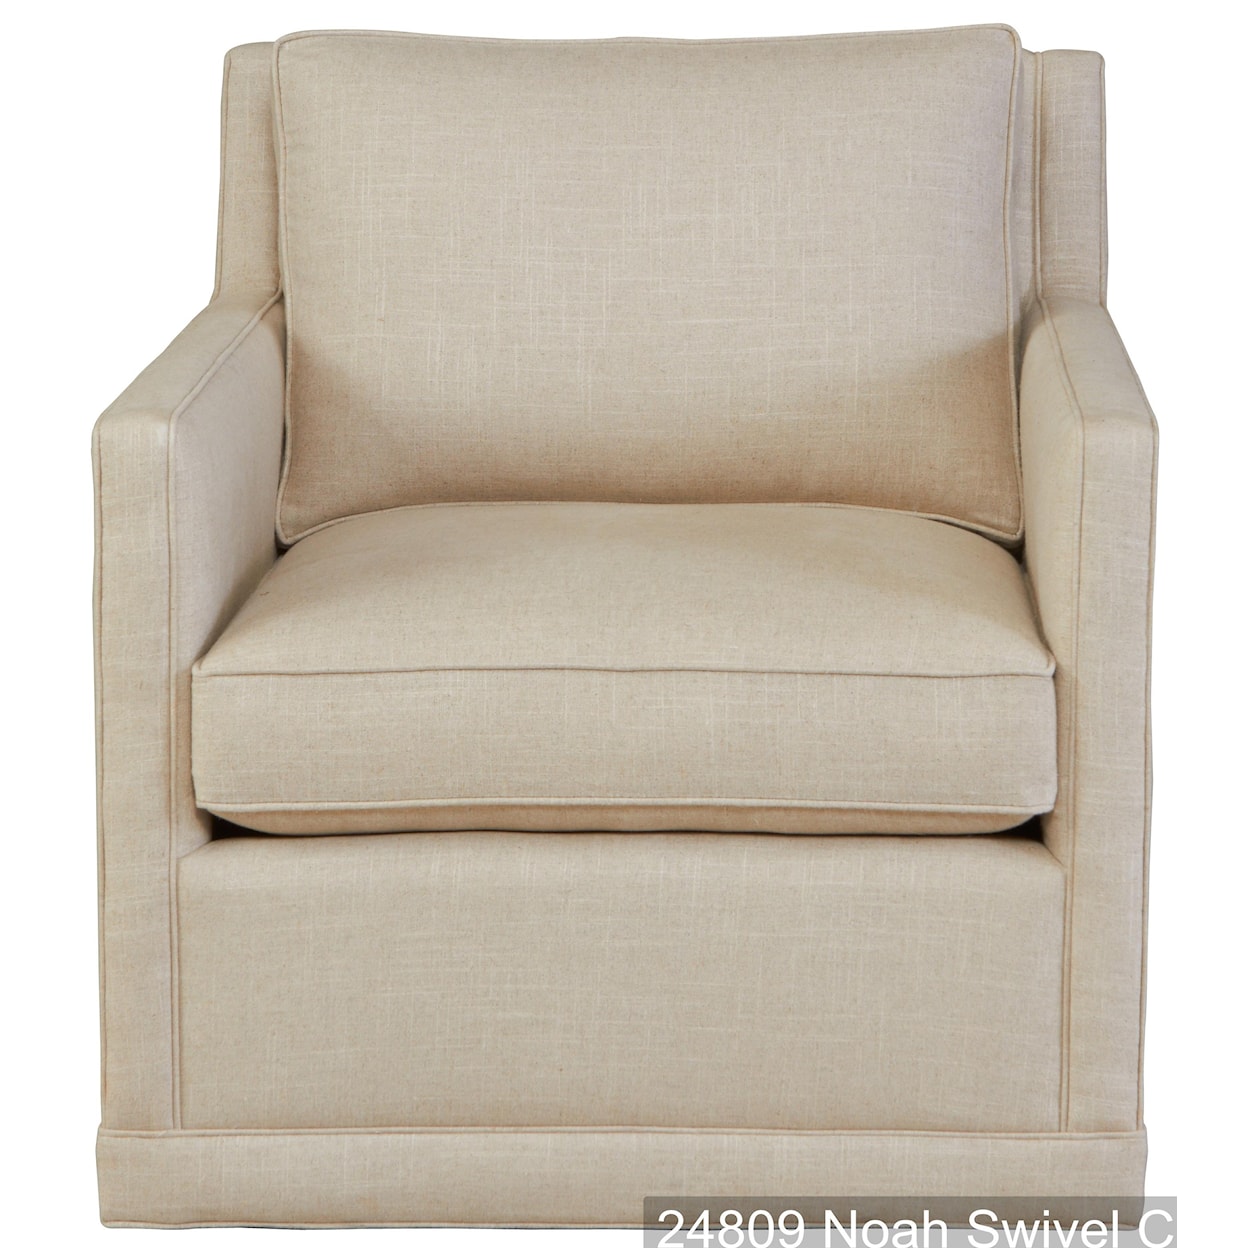 Southern Noah Upholstered Swivel Chair